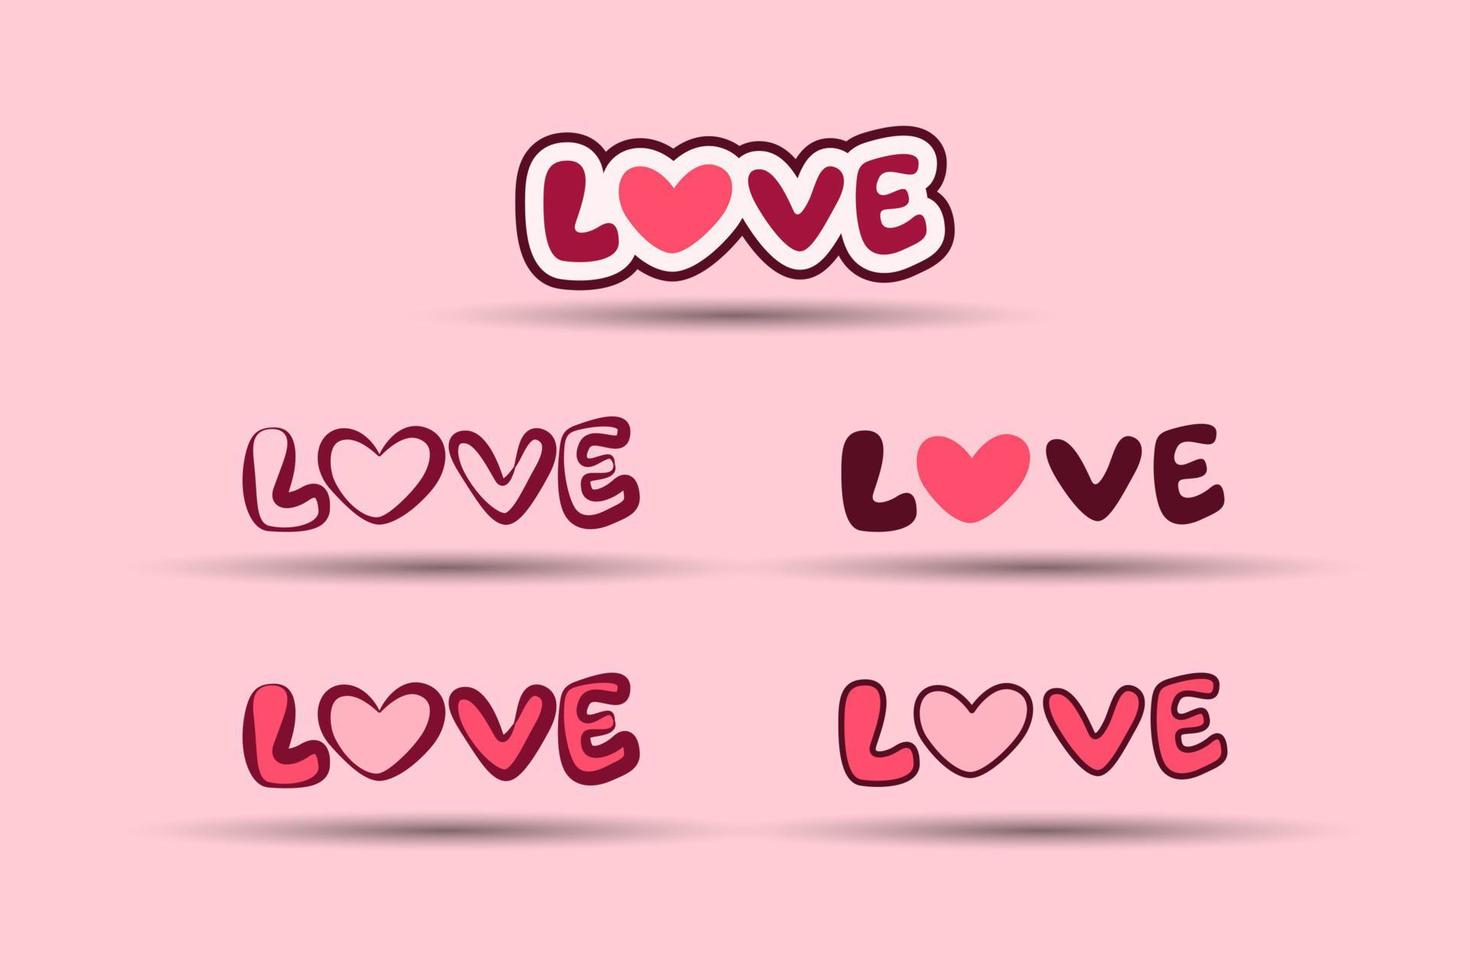 valentines day element. Valentines love letter or word typography. Vector illustration